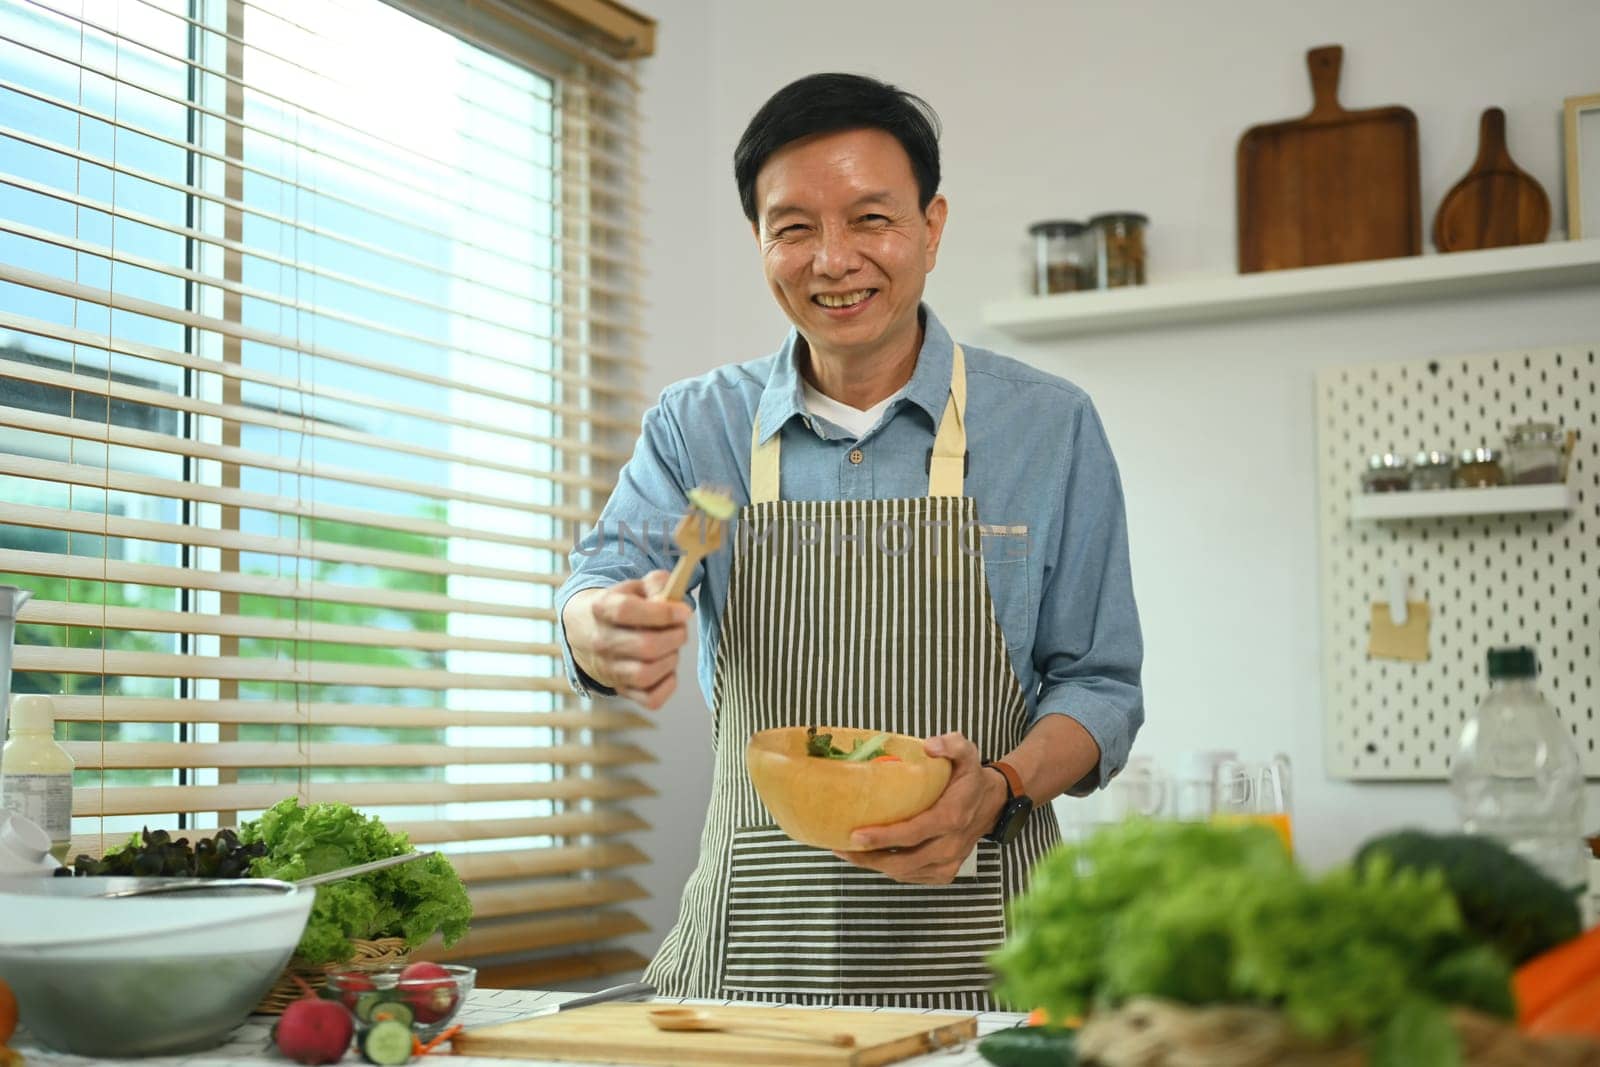 Positive middle age man in apron holding a bowl of salad and smiling at camera. Healthy eating concept.